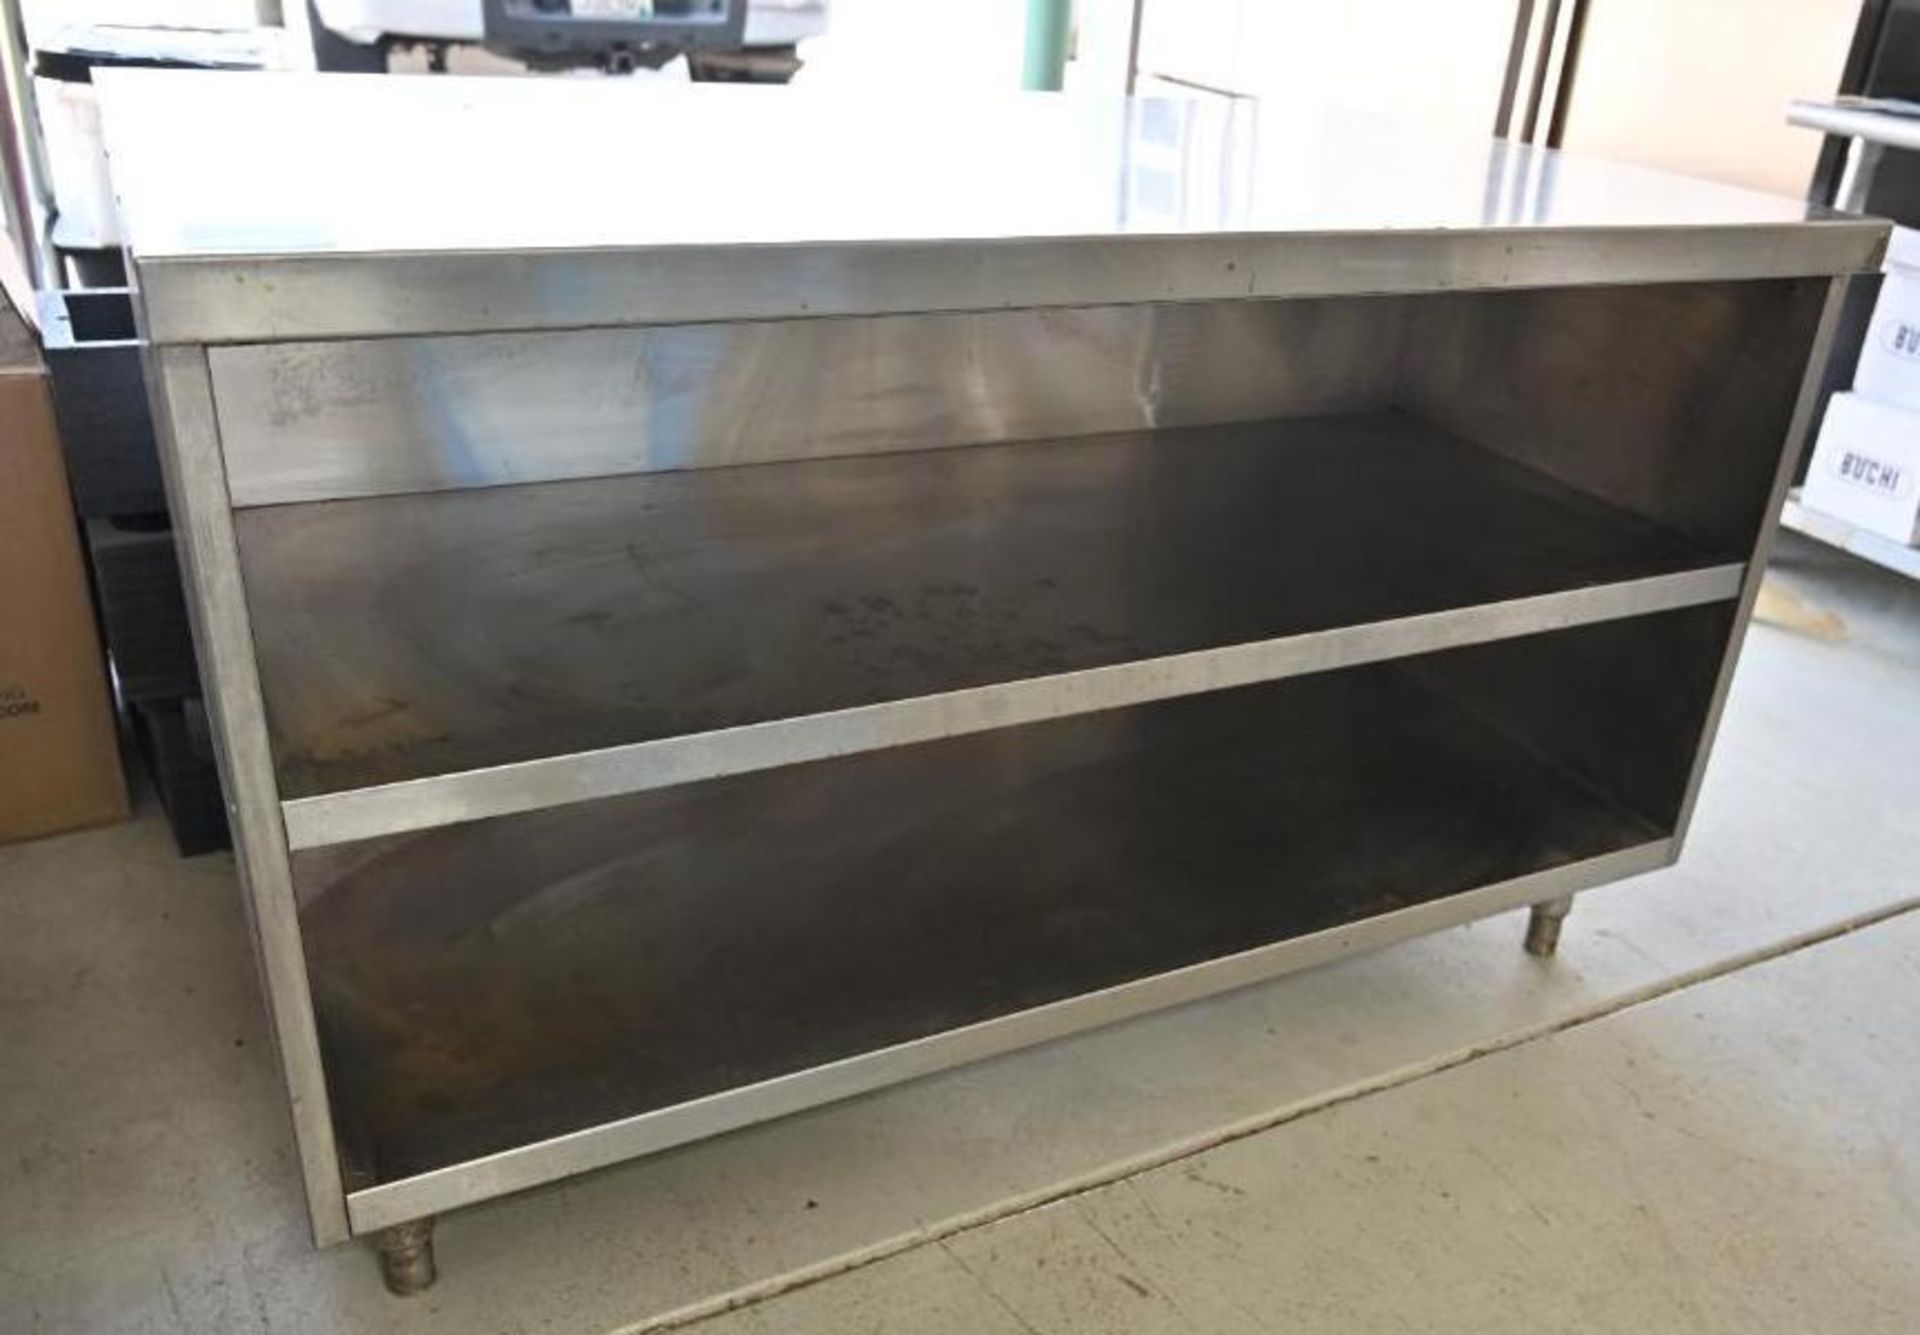 56.25" x 34" x 34.25" Stainless Steel Table with Two Shelves - Image 2 of 10